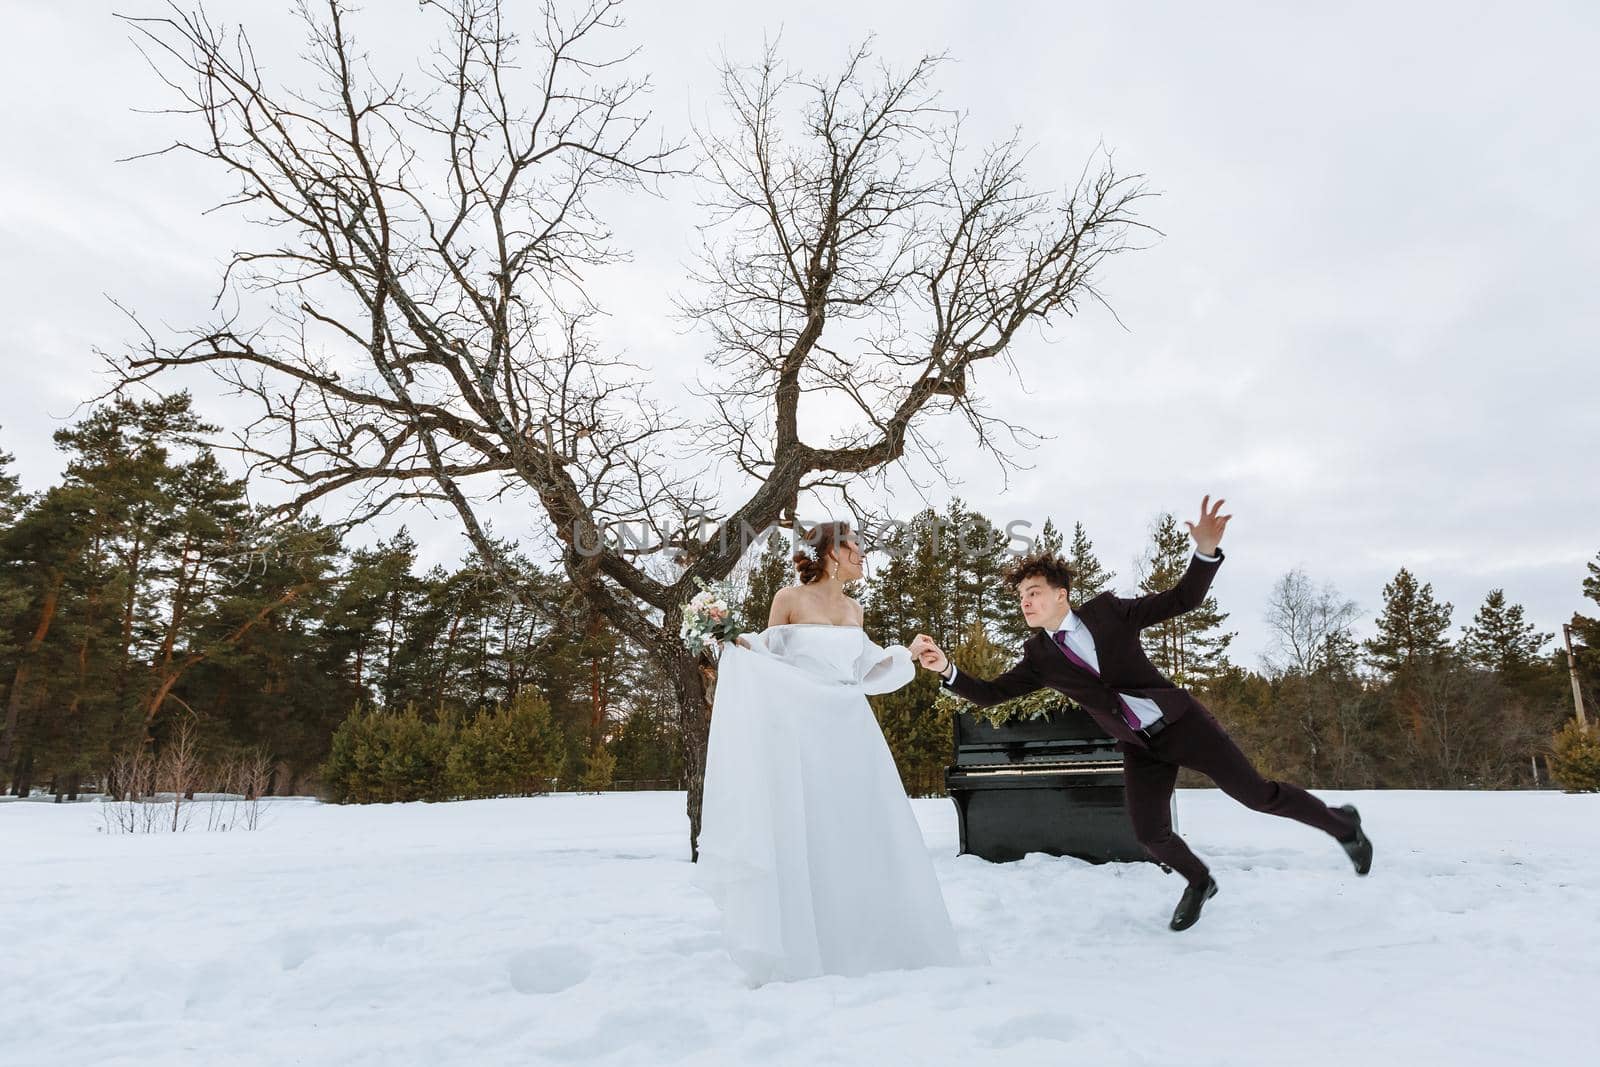 The bride holds the groom's hand. Winter forest, with a piano in the background. The groom slipped by deandy